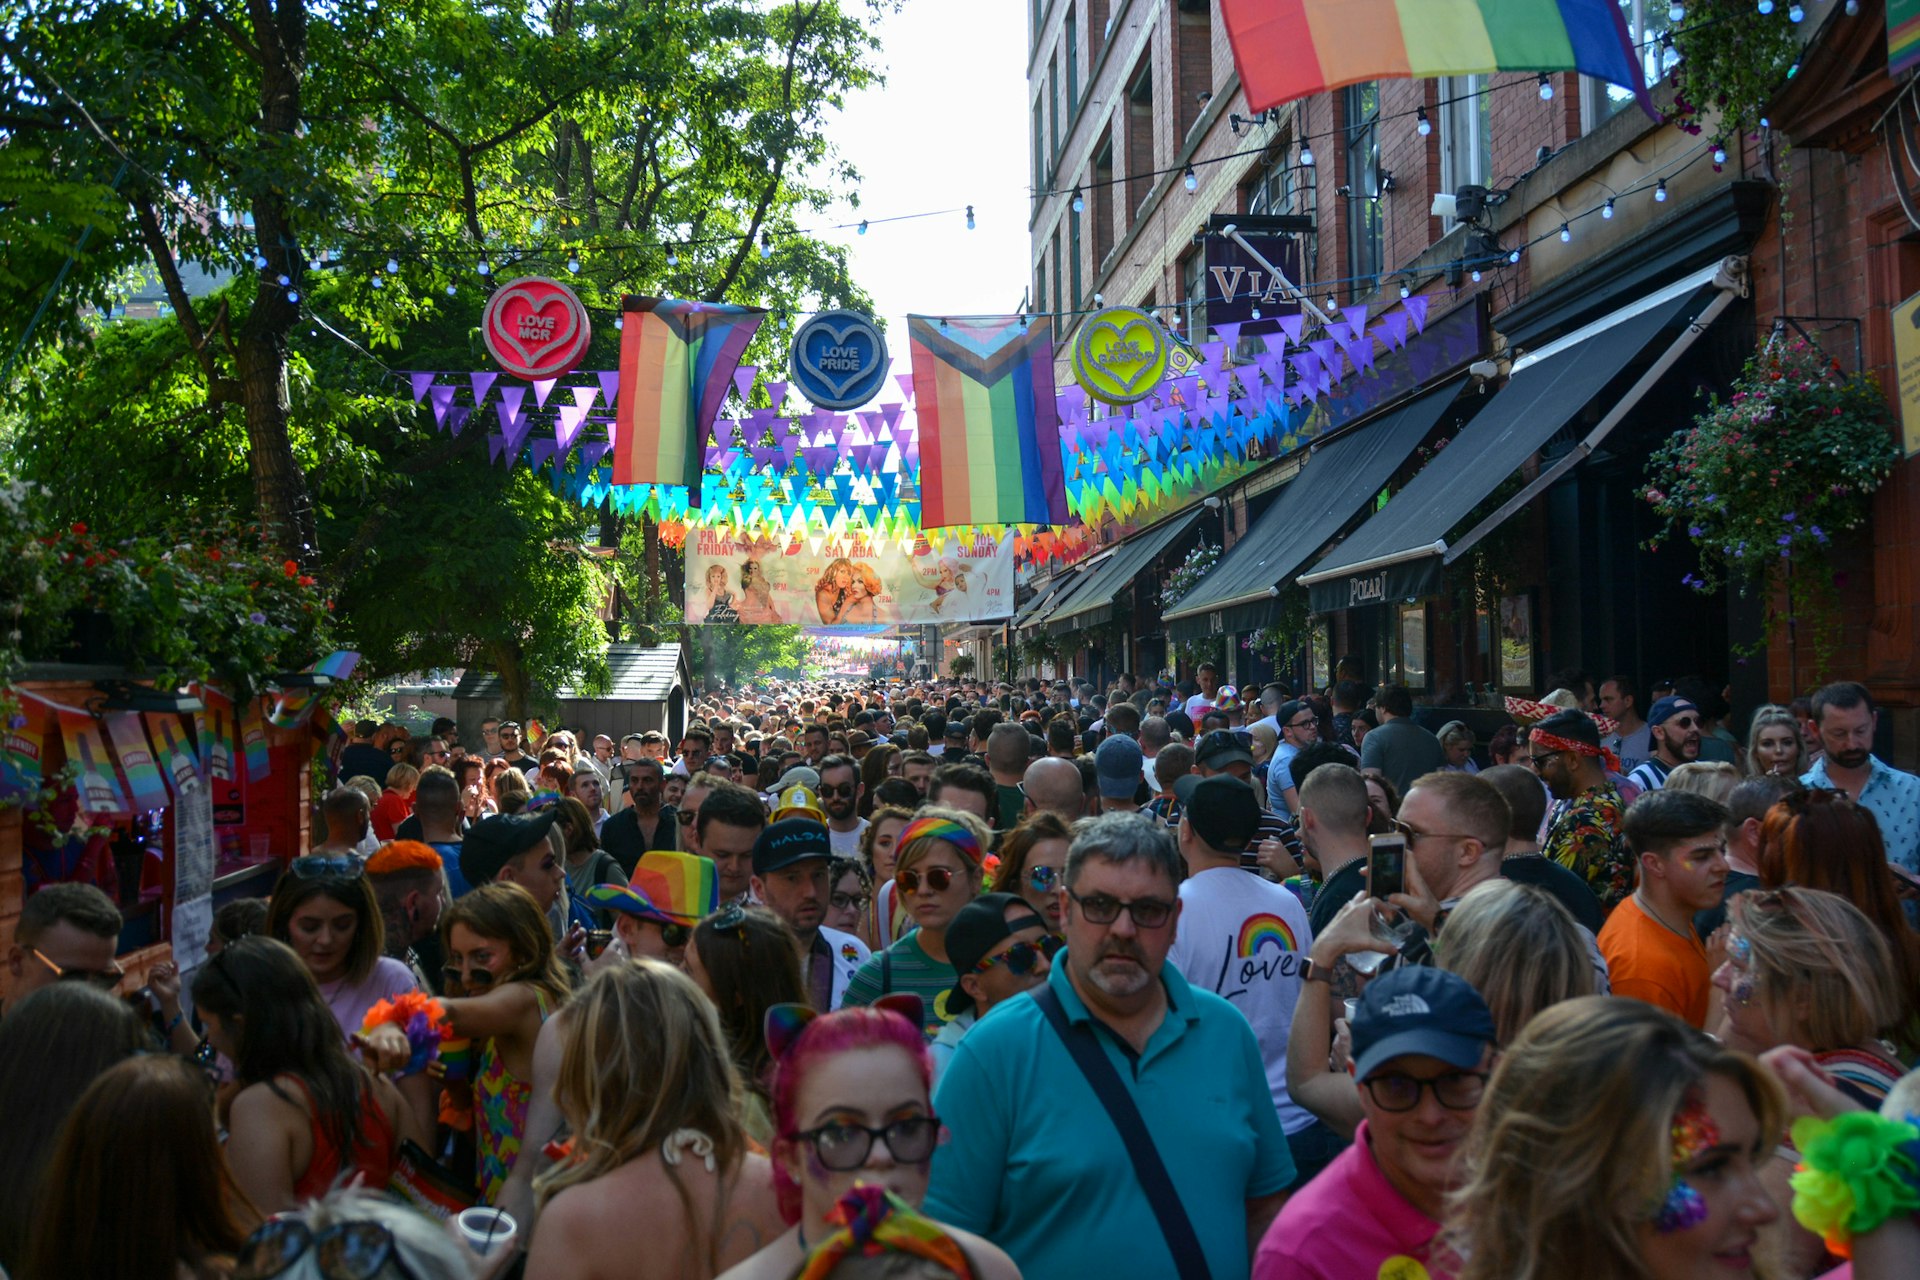 People celebrate during Manchester Pride, one of the UK's largest Gay Pride events including a parade and live music events throughout bank holiday weekend in August.